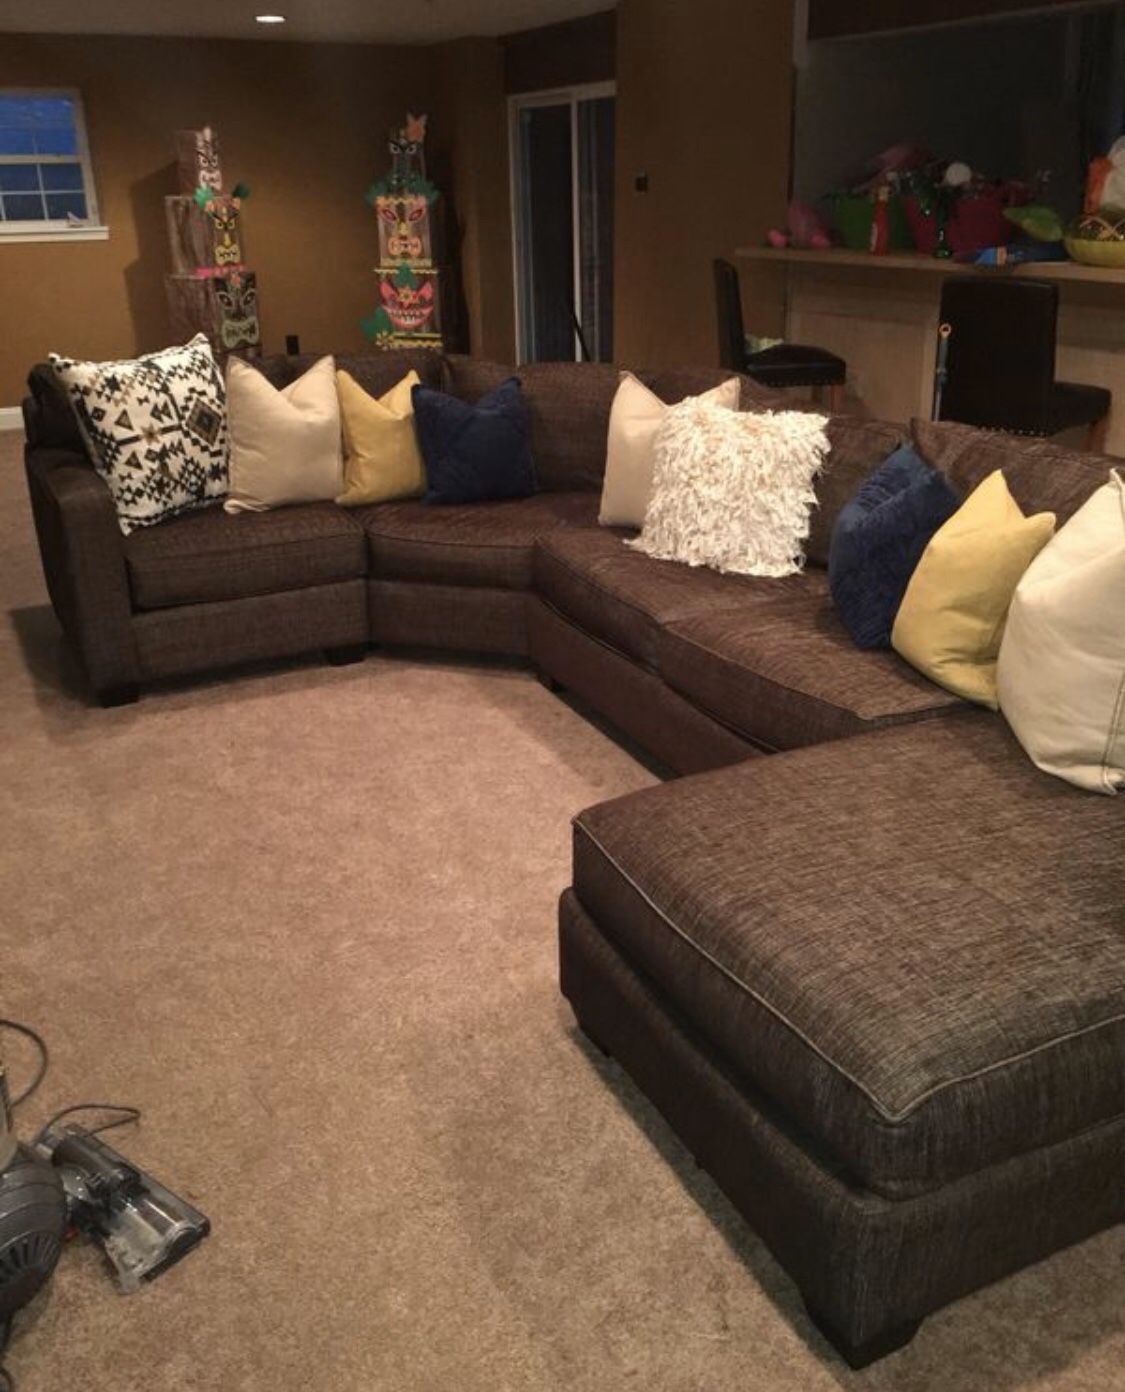 Large Sectional Sofa For Sale (Serious Buyers Only)